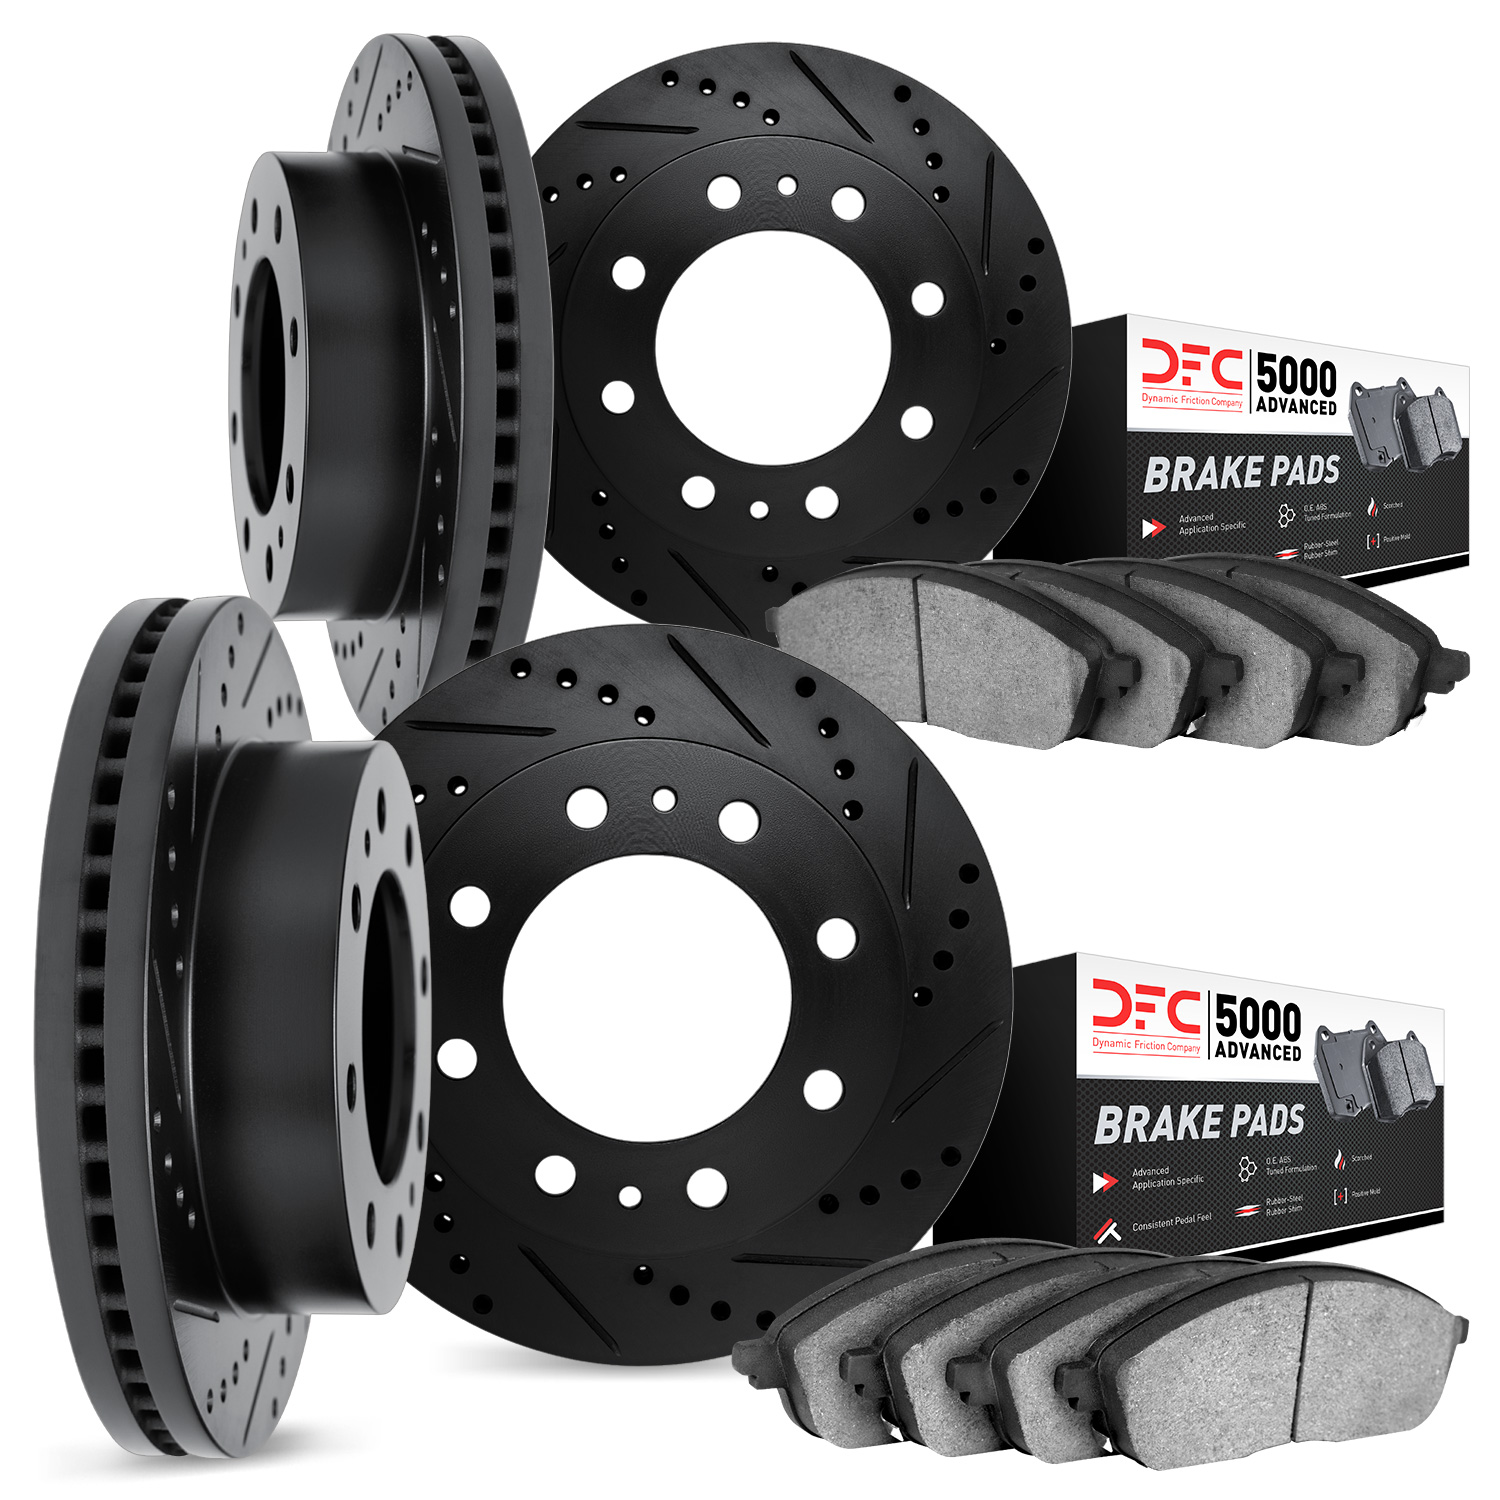 8504-48026 Drilled/Slotted Brake Rotors w/5000 Advanced Brake Pads Kit [Black], 2001-2010 GM, Position: Front and Rear